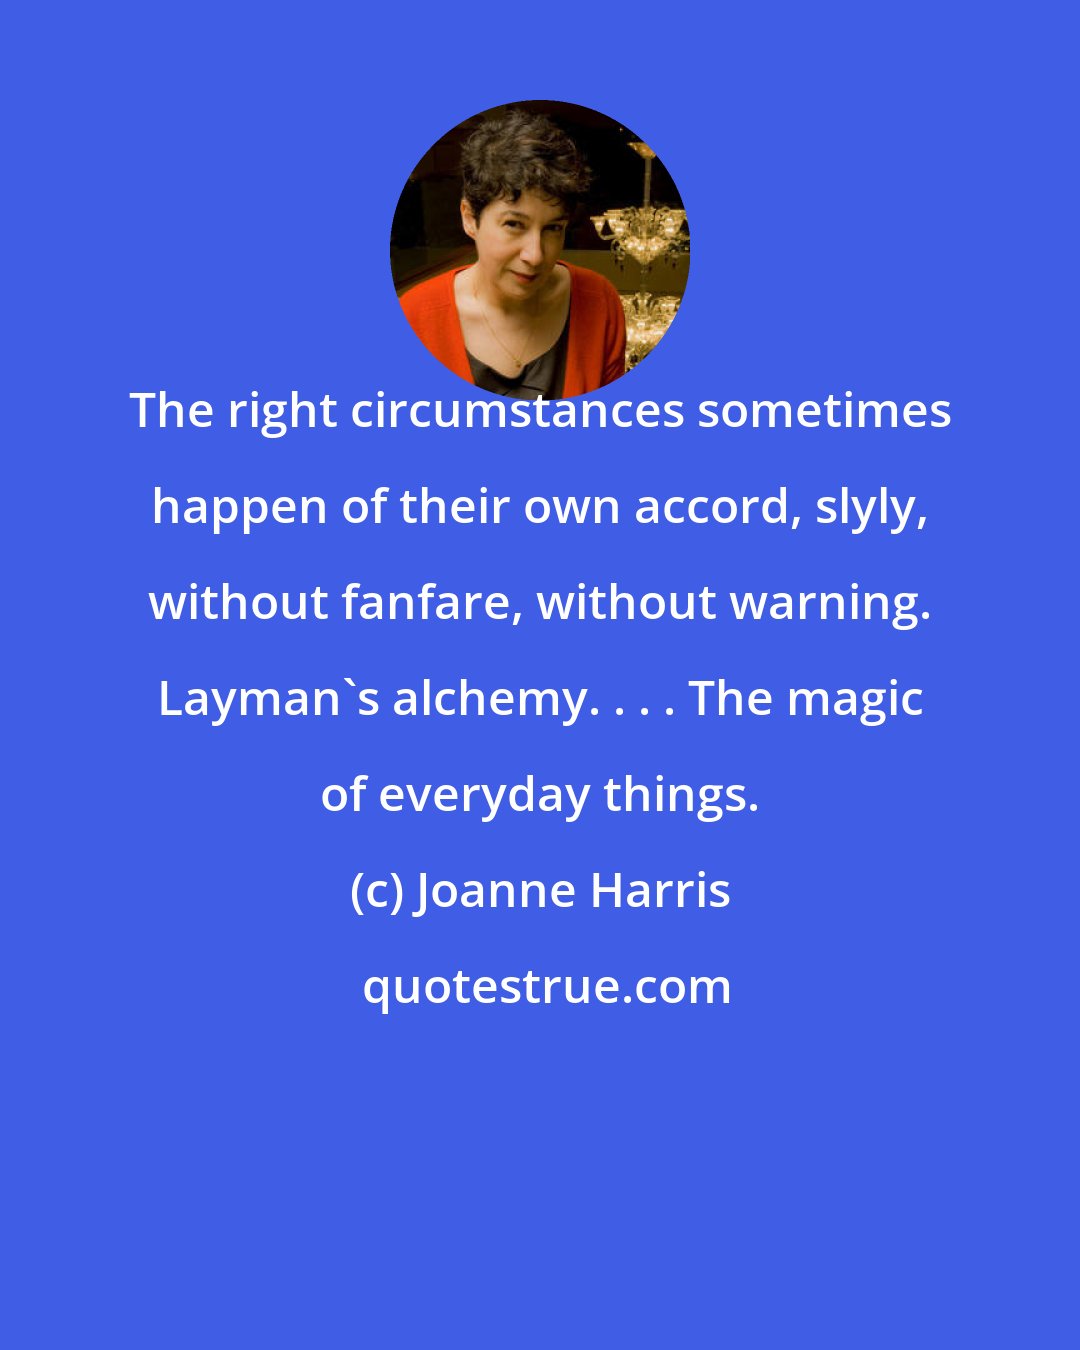 Joanne Harris: The right circumstances sometimes happen of their own accord, slyly, without fanfare, without warning. Layman's alchemy. . . . The magic of everyday things.